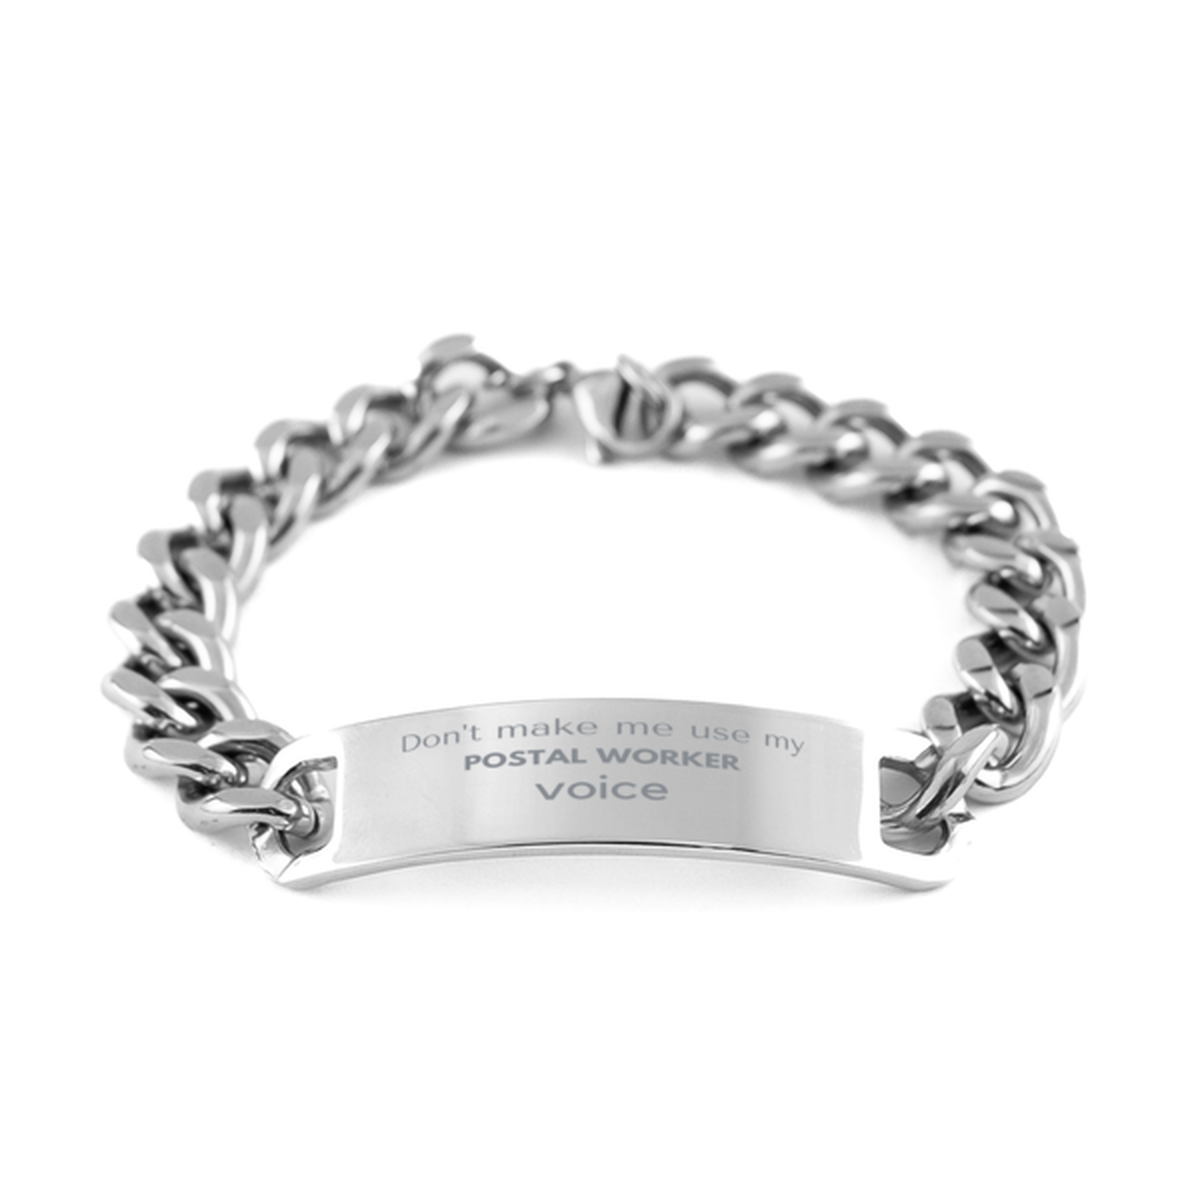 Don't make me use my Postal Worker voice, Sarcasm Postal Worker Gifts, Christmas Postal Worker Cuban Chain Stainless Steel Bracelet Birthday Unique Gifts For Postal Worker Coworkers, Men, Women, Colleague, Friends